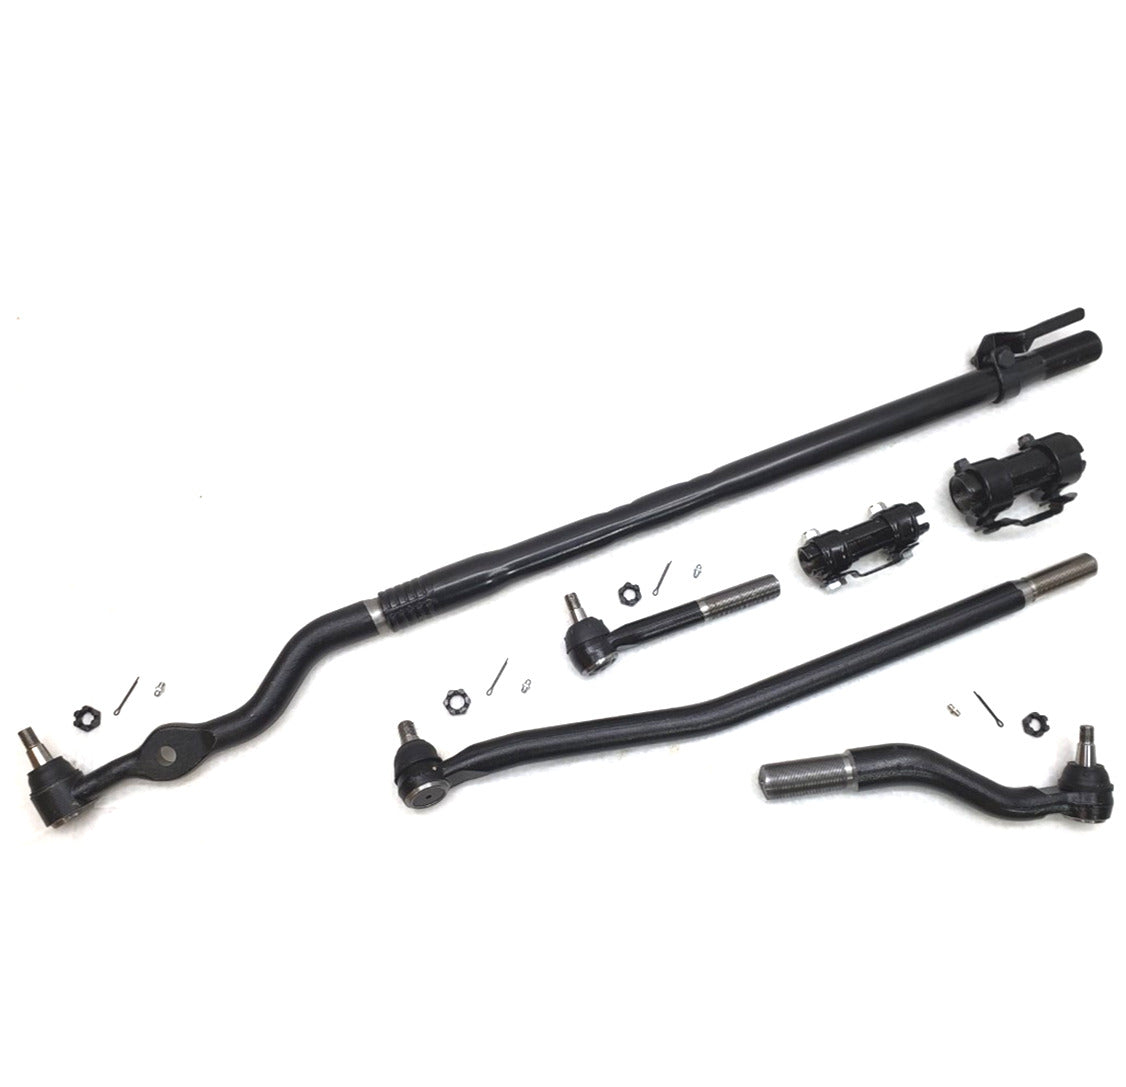 Lifetime Drag Link Tie Rod Sleeve Steering Kit for 1999-2004 Ford F250, F350 Super Duty 2WD, Mono Beam Axle